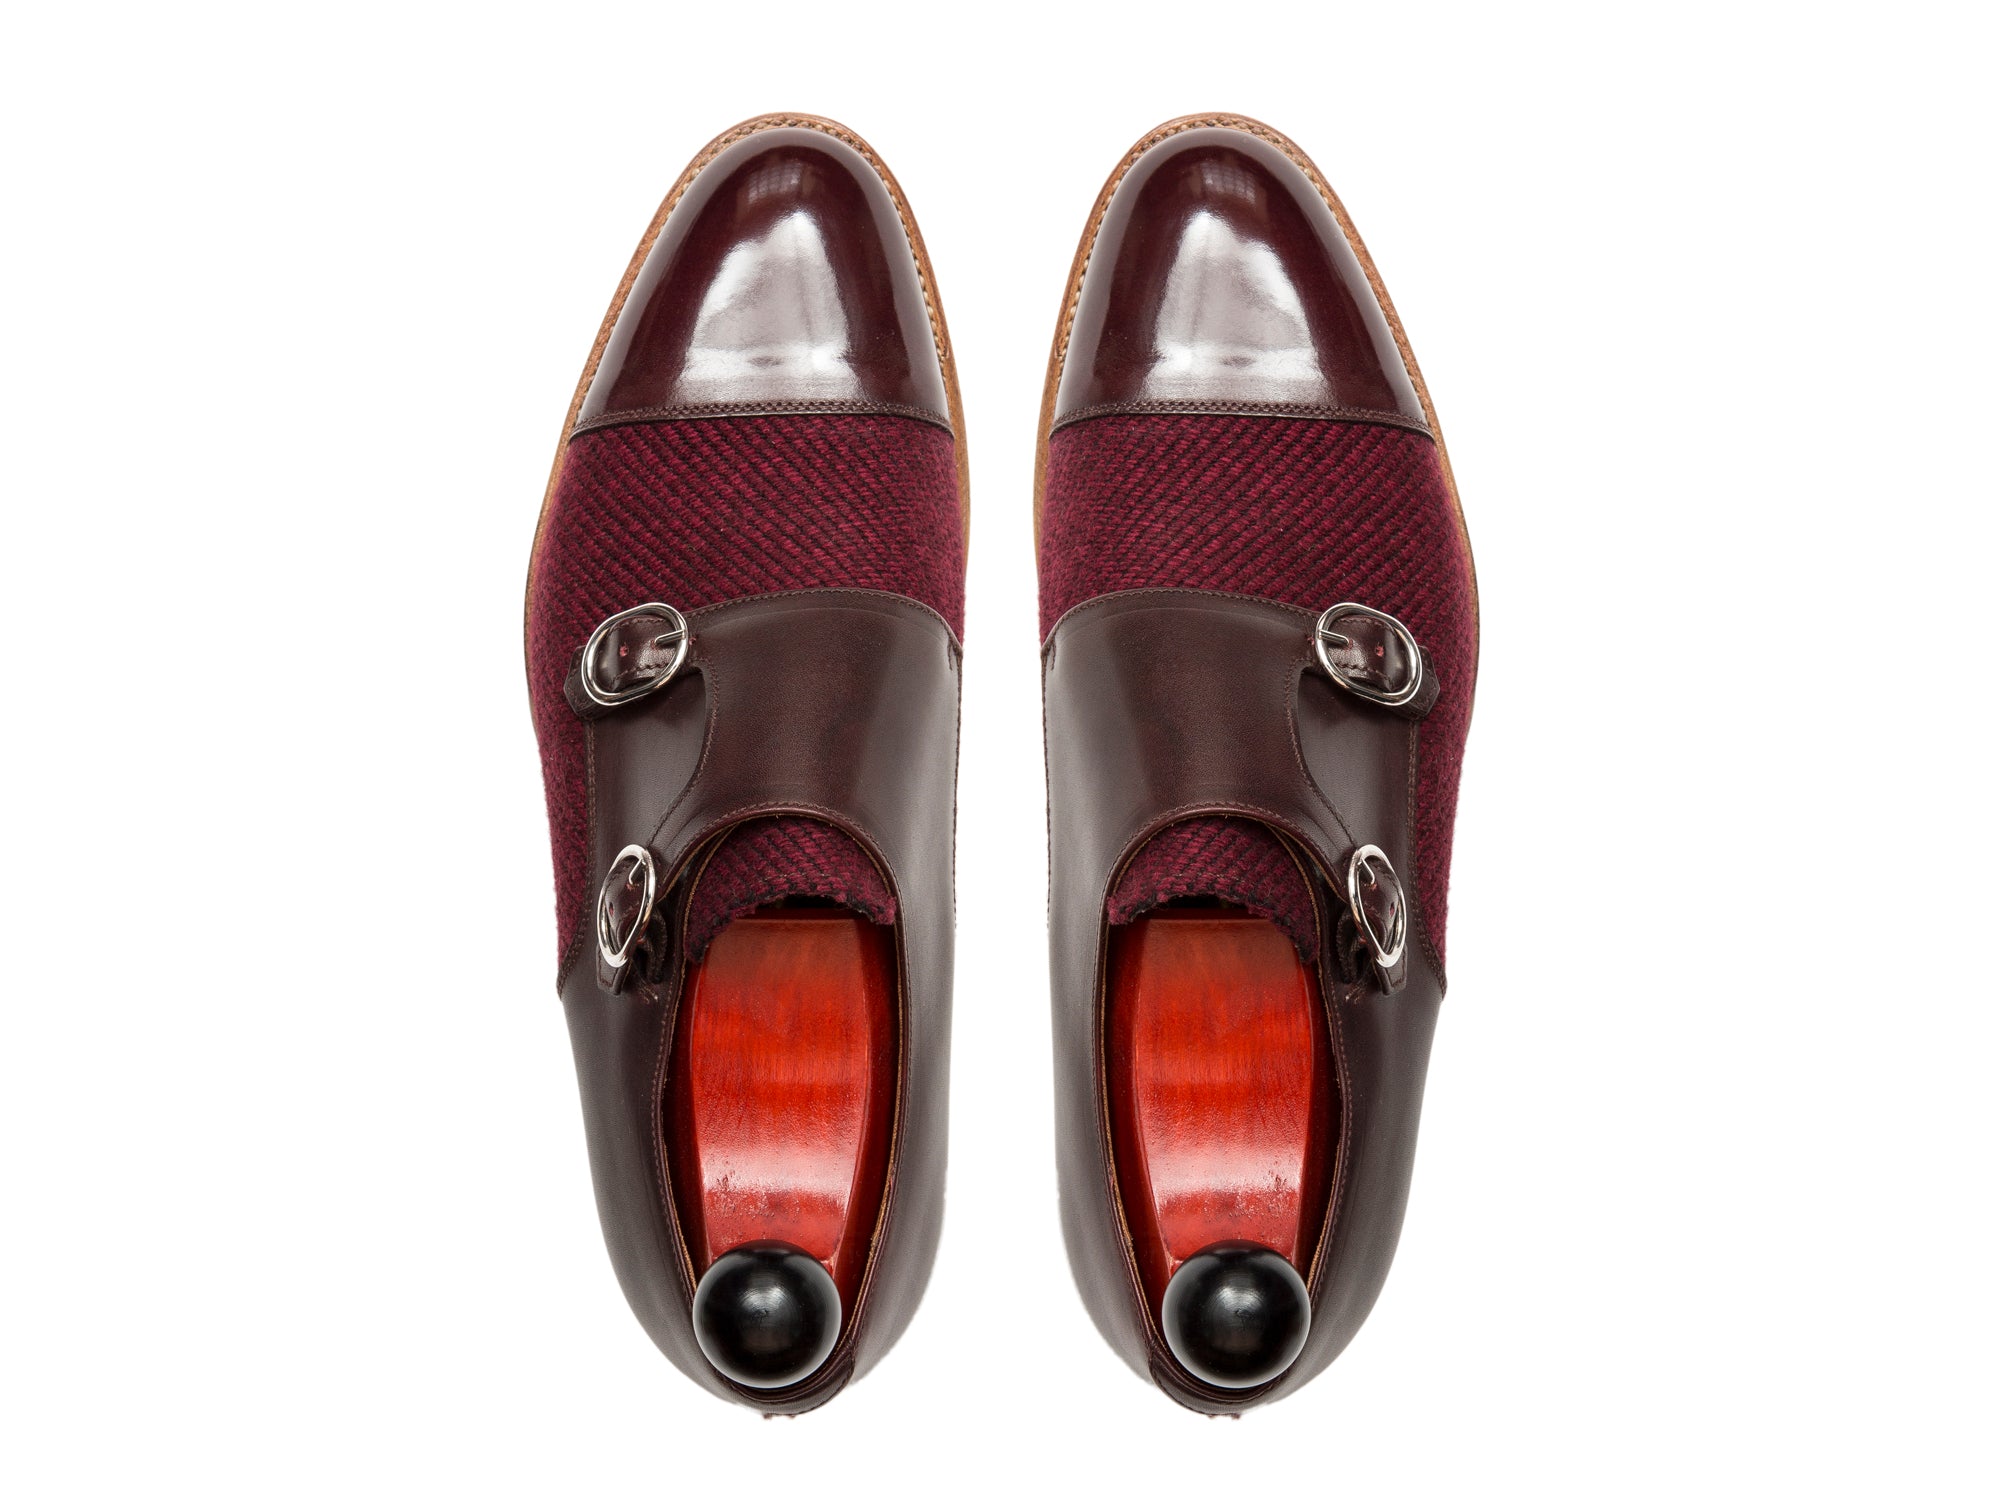 Kent - MTO - Burgundy Calf / Red Poulsbo - TMG Last - Natural Single Leather Sole